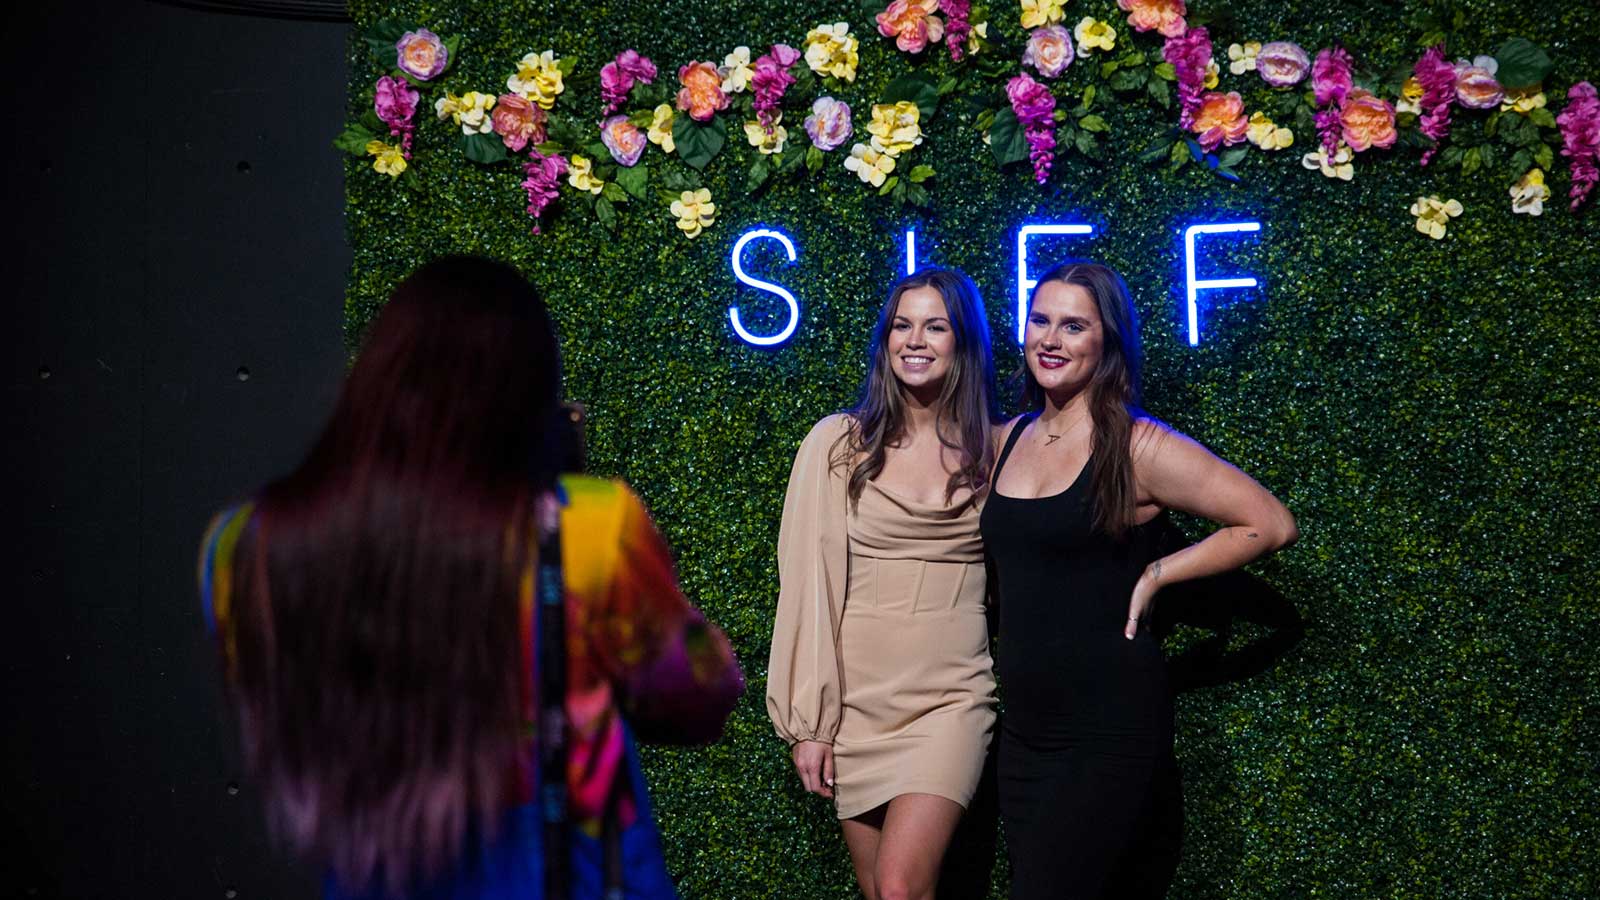 Guests pose in front of a photo op with a SIFF neon sign and colorful flowers